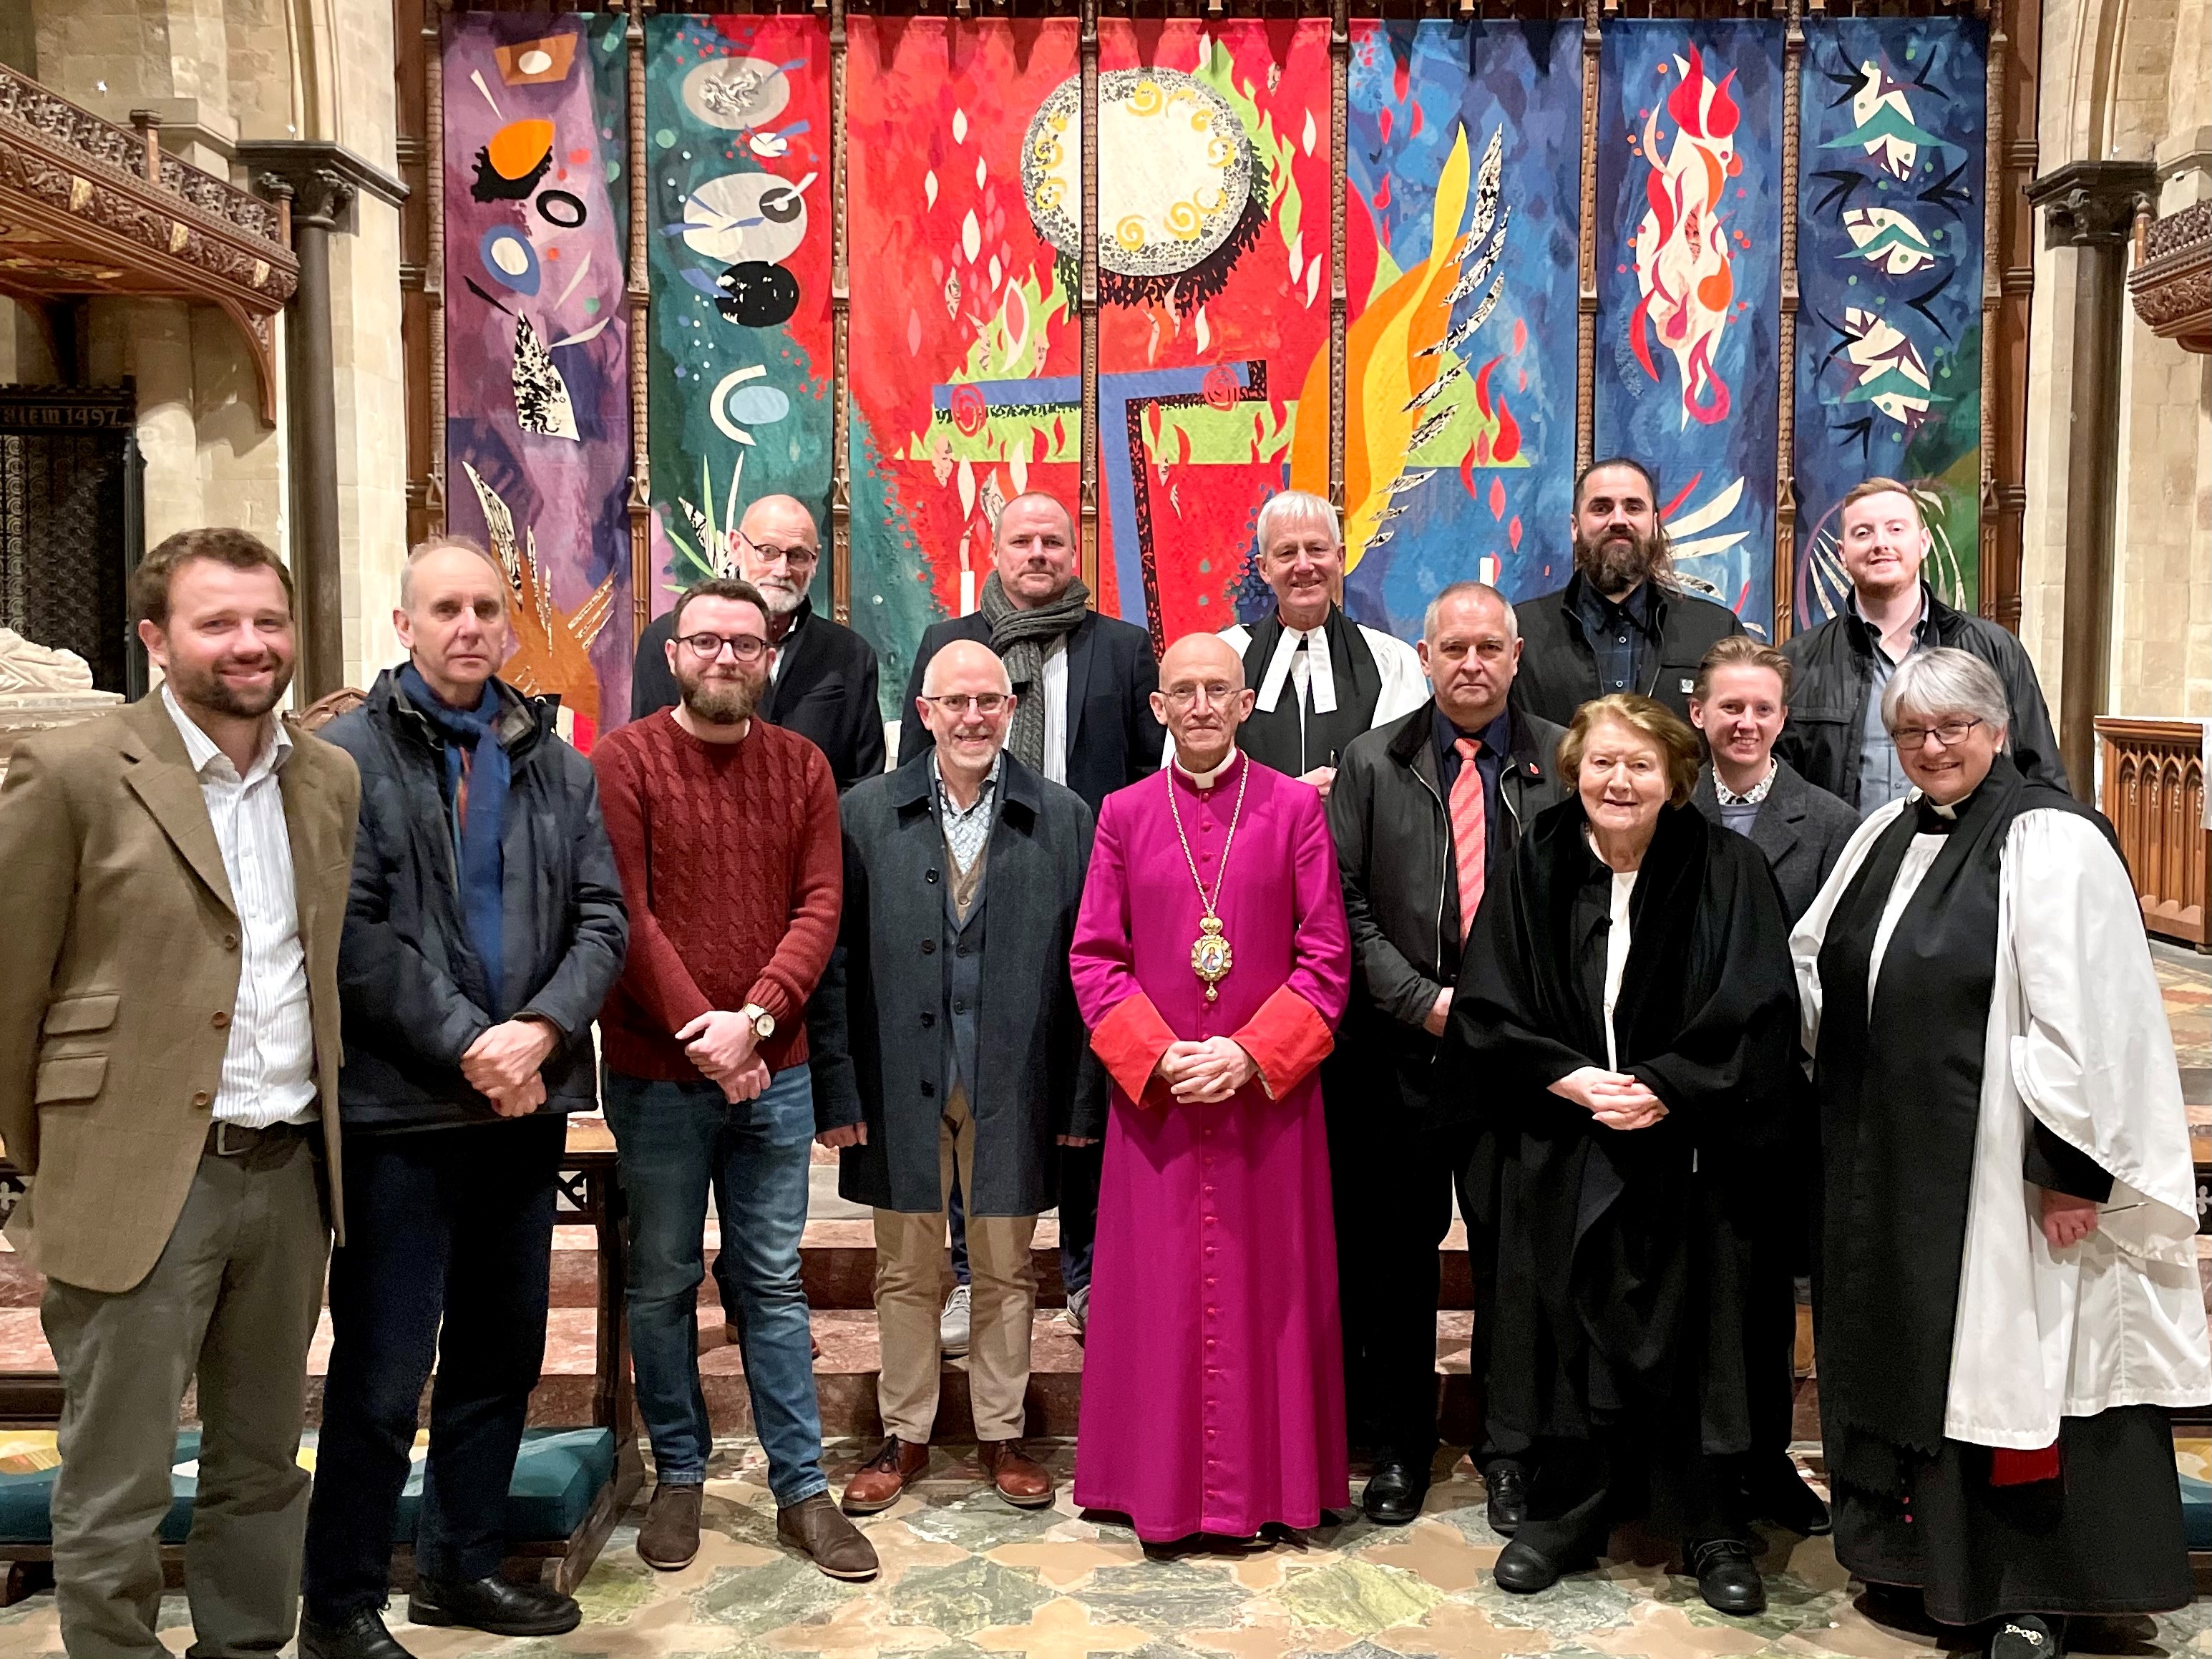 A group of people who worked on the Cathedral roofing and lighting pose for a photo in front of the Cathedral's High Altar- also including the Bishop of Chichester the Right Reverend Dr Martin Warner, Canon Treasurer the Revd Vanessa Baron and Dame Patricia Routledge Patron of the roof restoration.